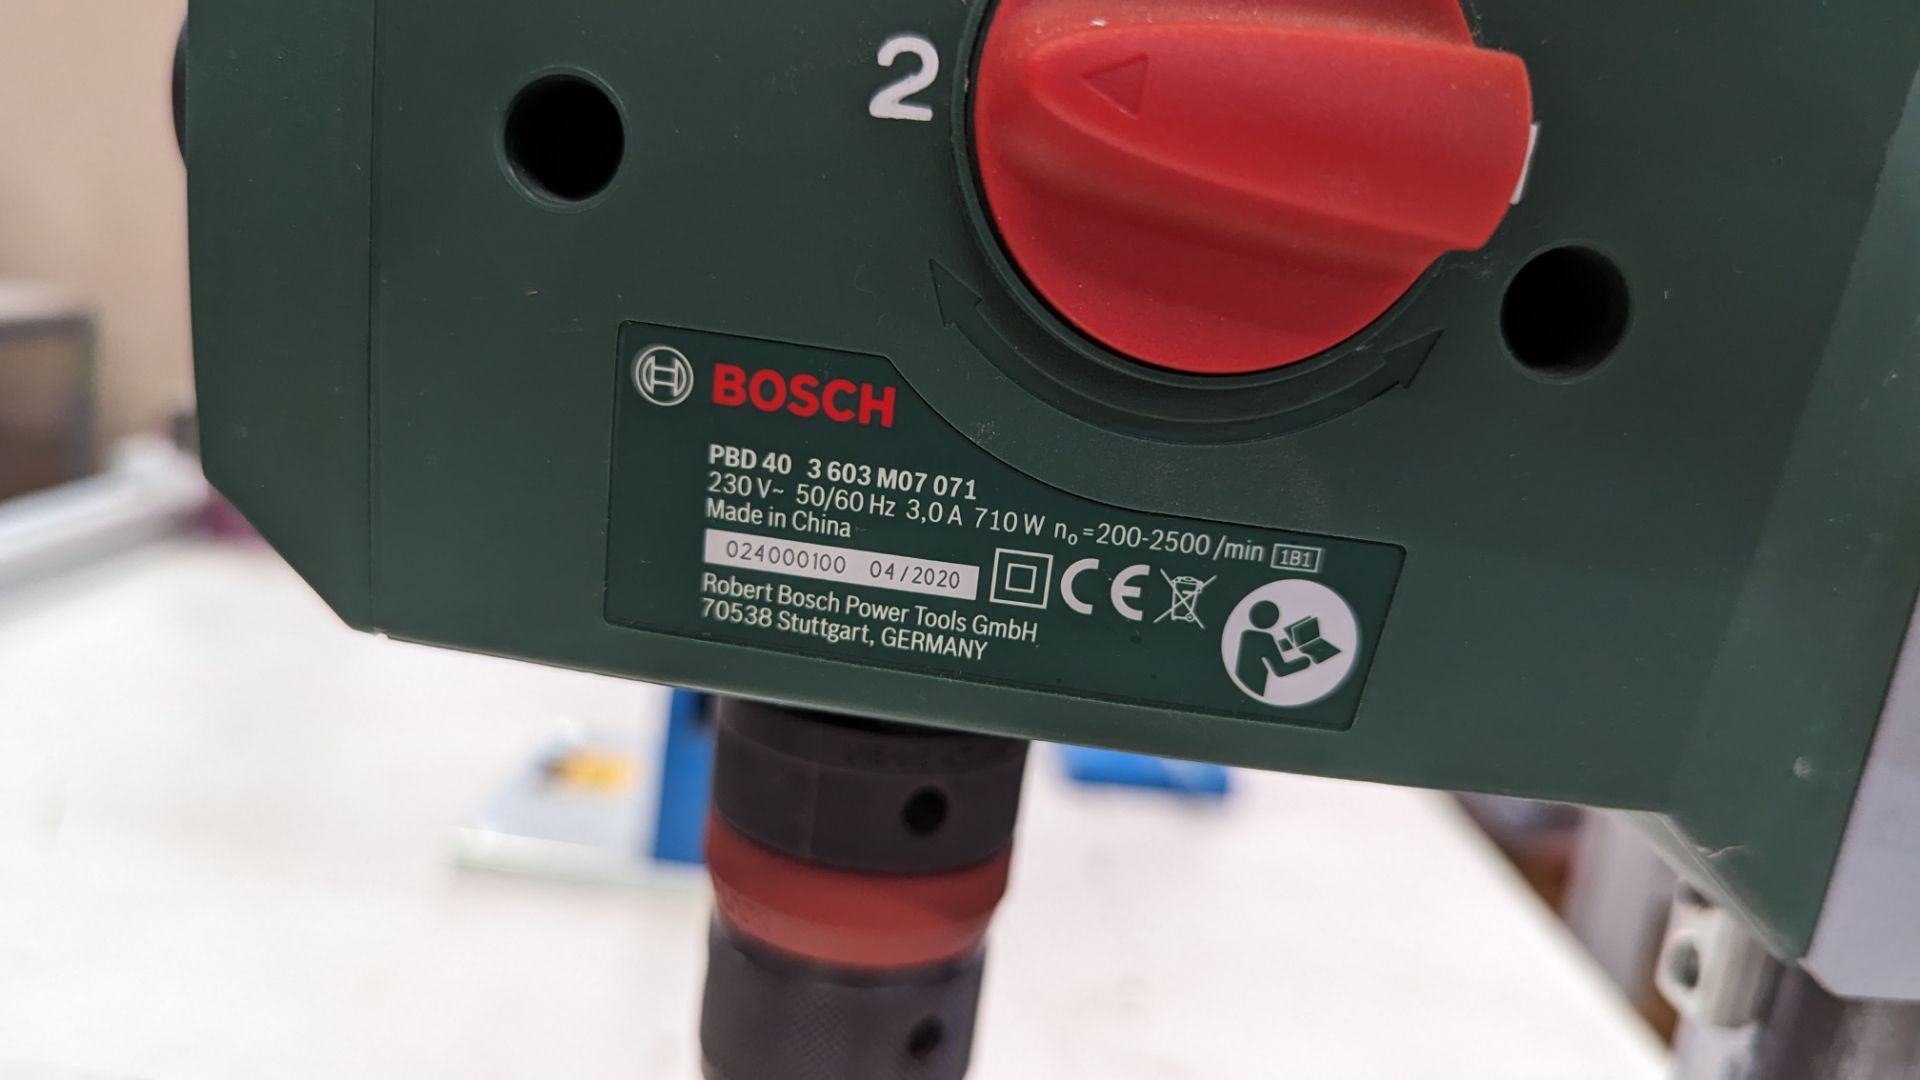 Bosch PBD40 bench drill system with laser technology - Image 5 of 10